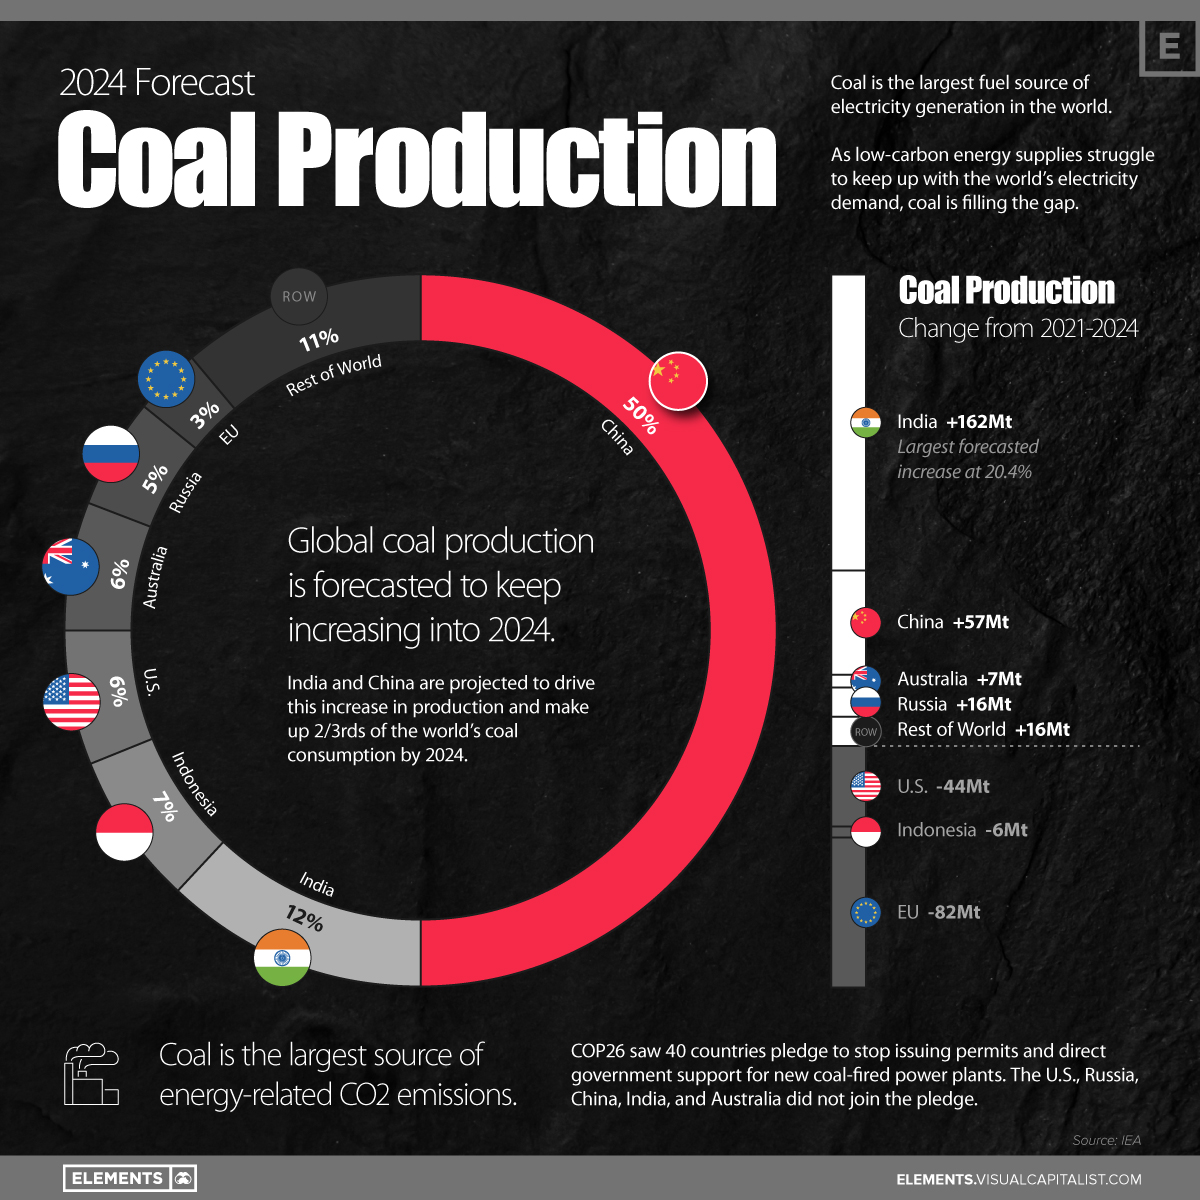 leading coal producing states